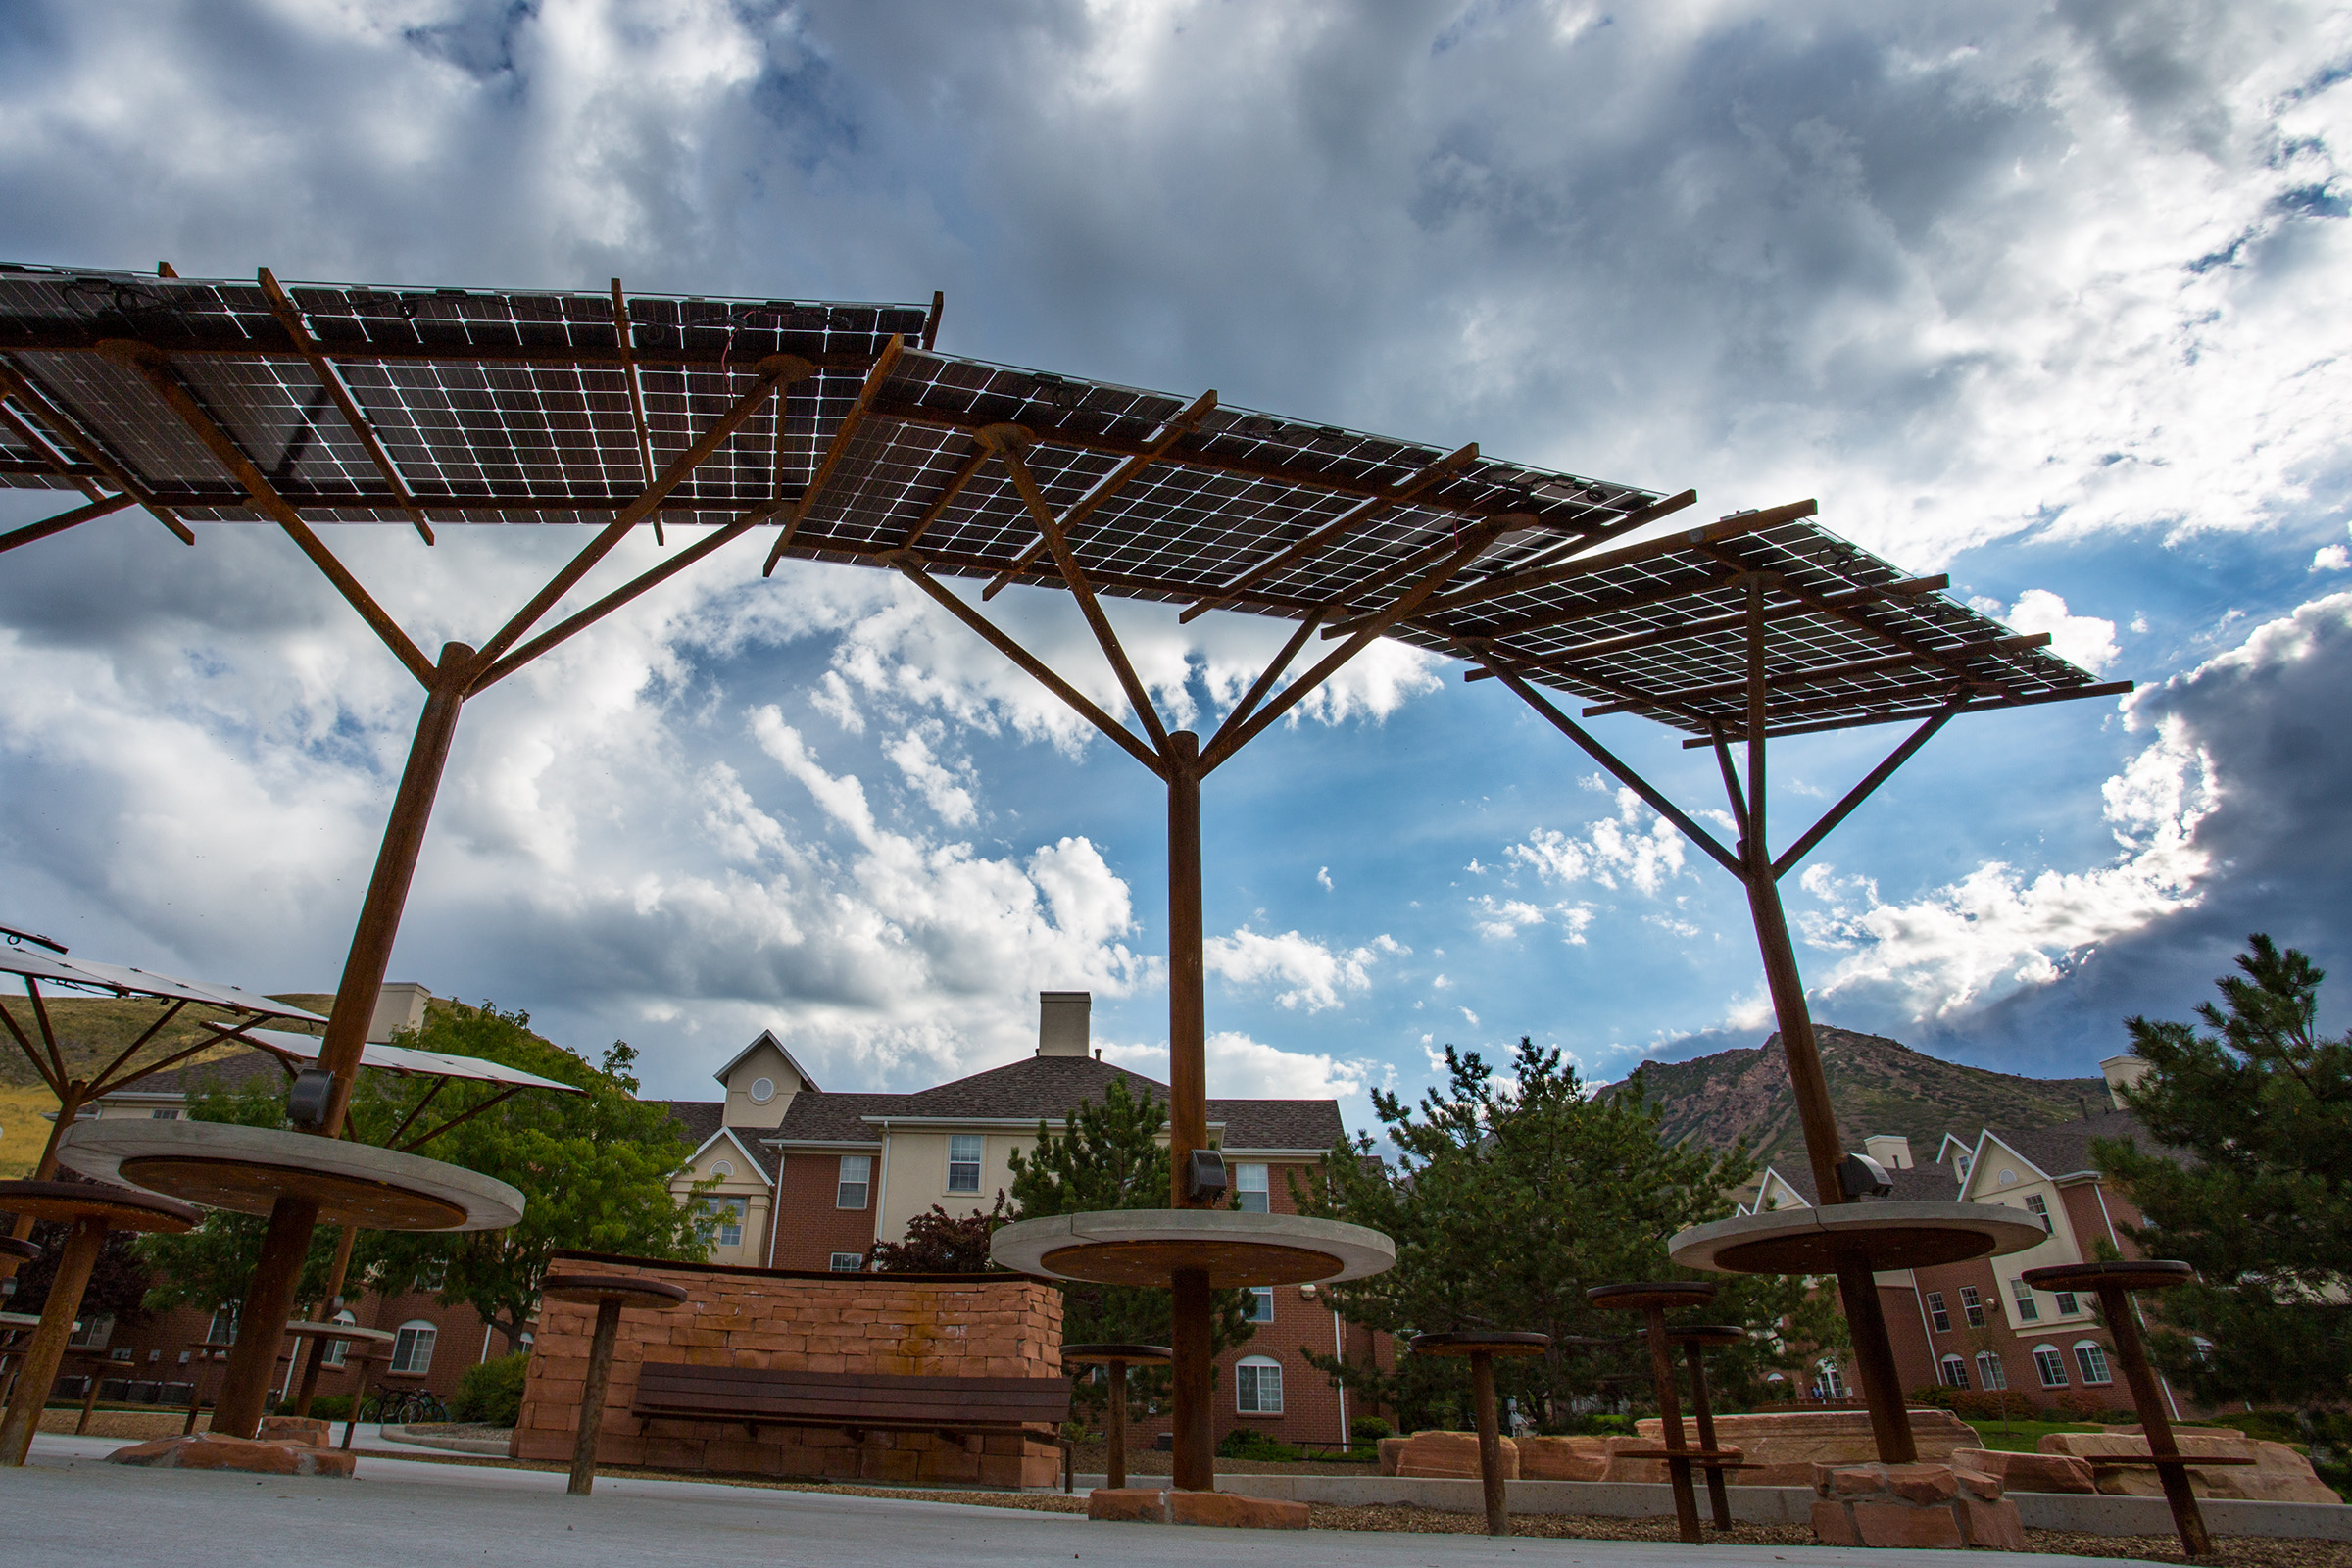 The Student Solar Plaza will produce approximately 8,681 kWh of energy per year.